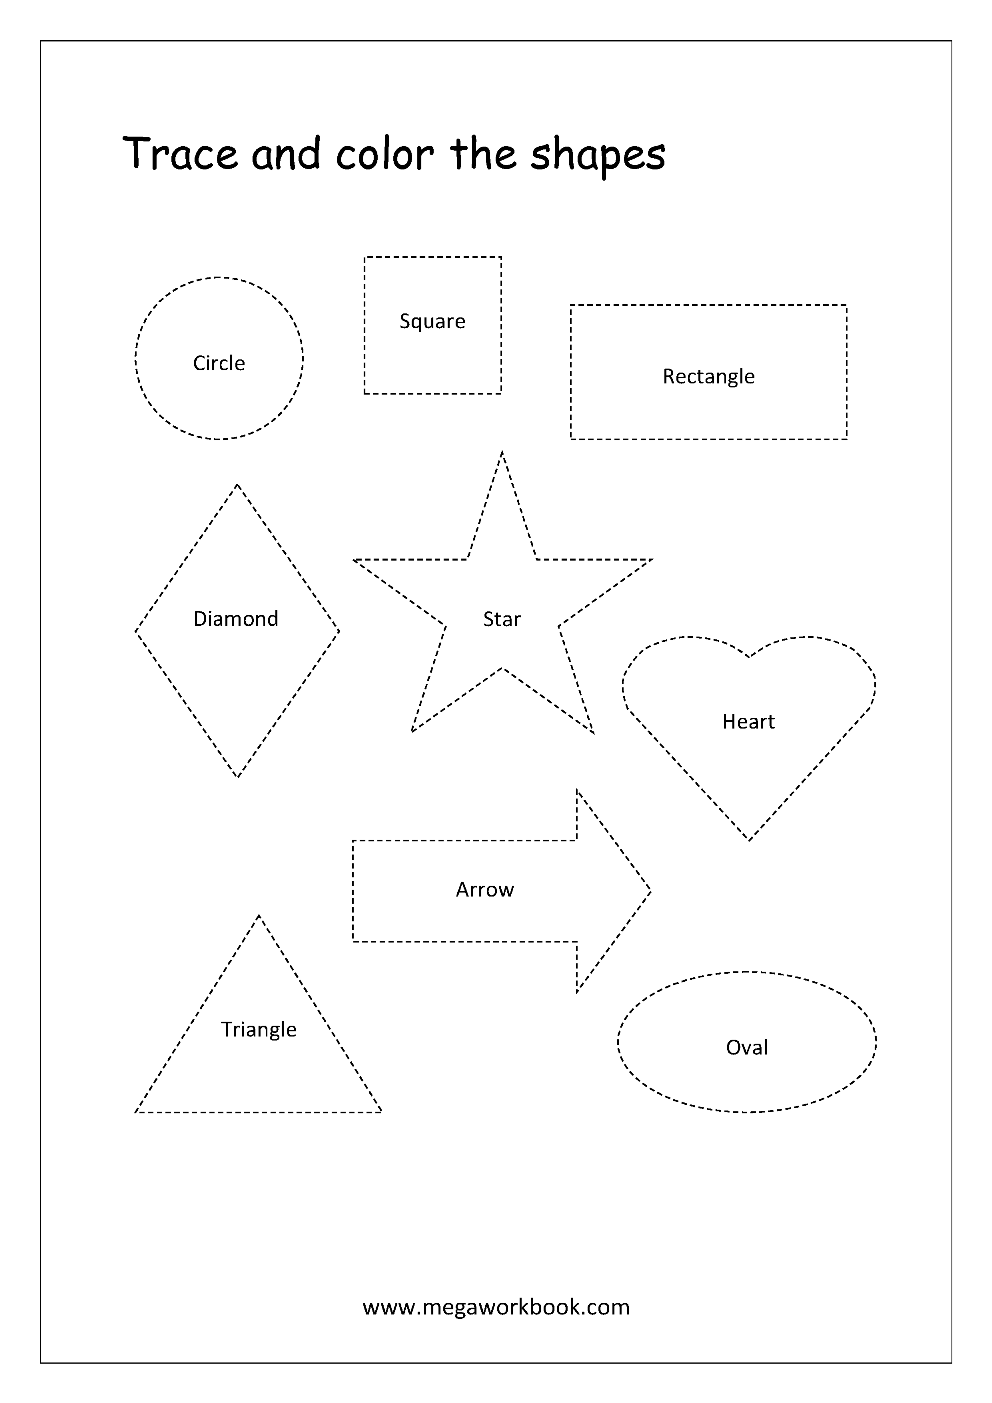 free-printable-shapes-worksheets-tracing-simple-shapes-pre-writing